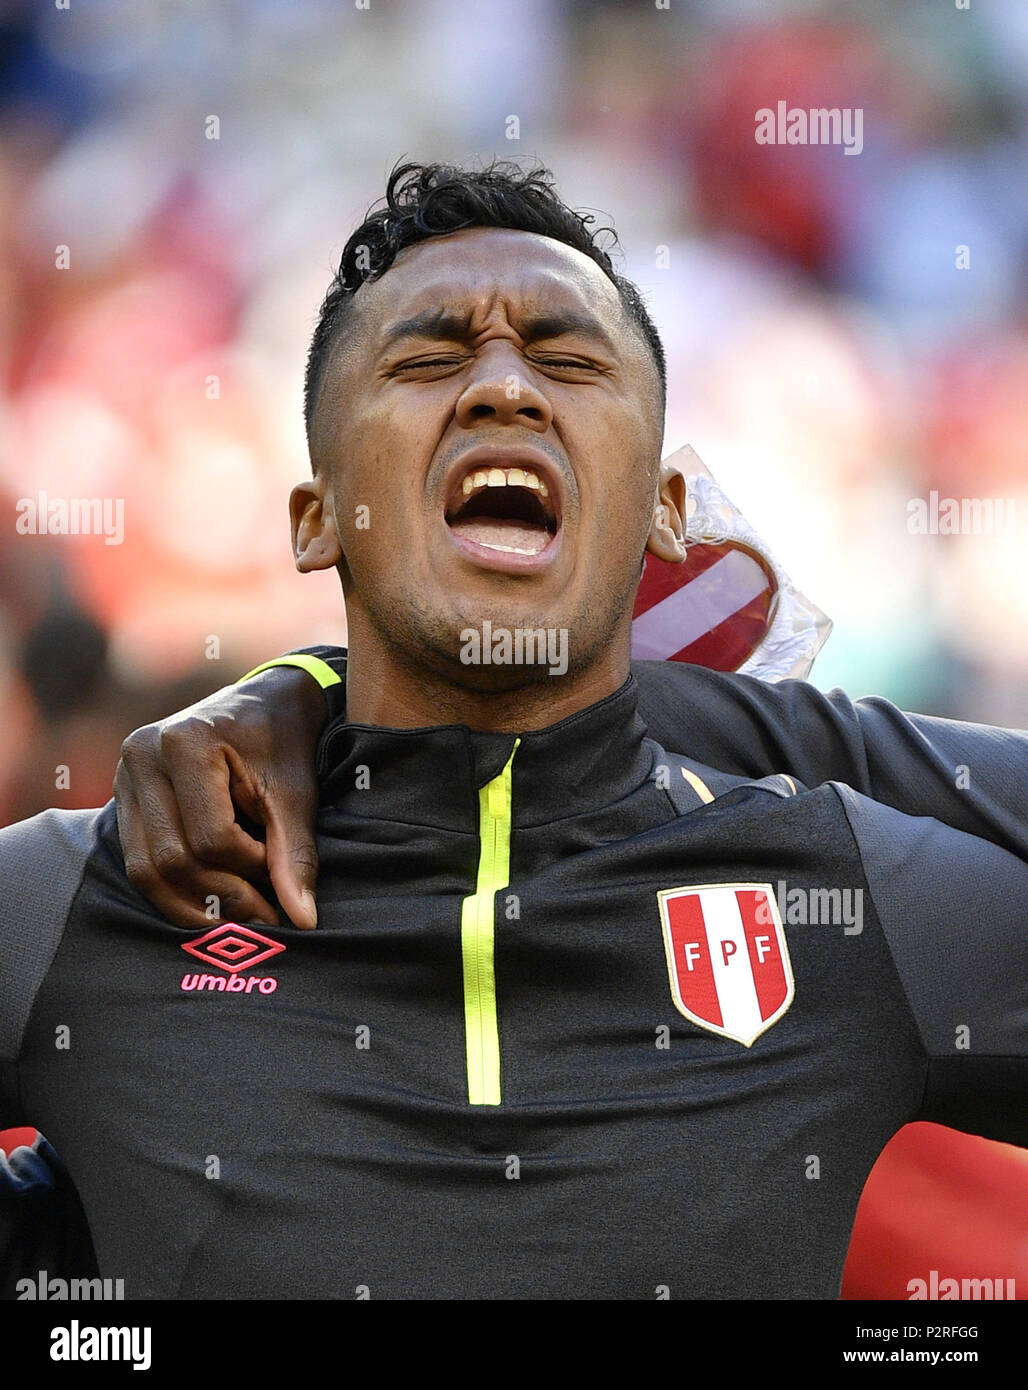 Saransk, Russia. 16th June, 2018. Renato Tapia of Peru sings national anthem prior to a group C match between Peru and Denmark at the 2018 FIFA World Cup in Saransk, Russia, June 16, 2018. Credit: Lui Siu Wai/Xinhua/Alamy Live News Stock Photo